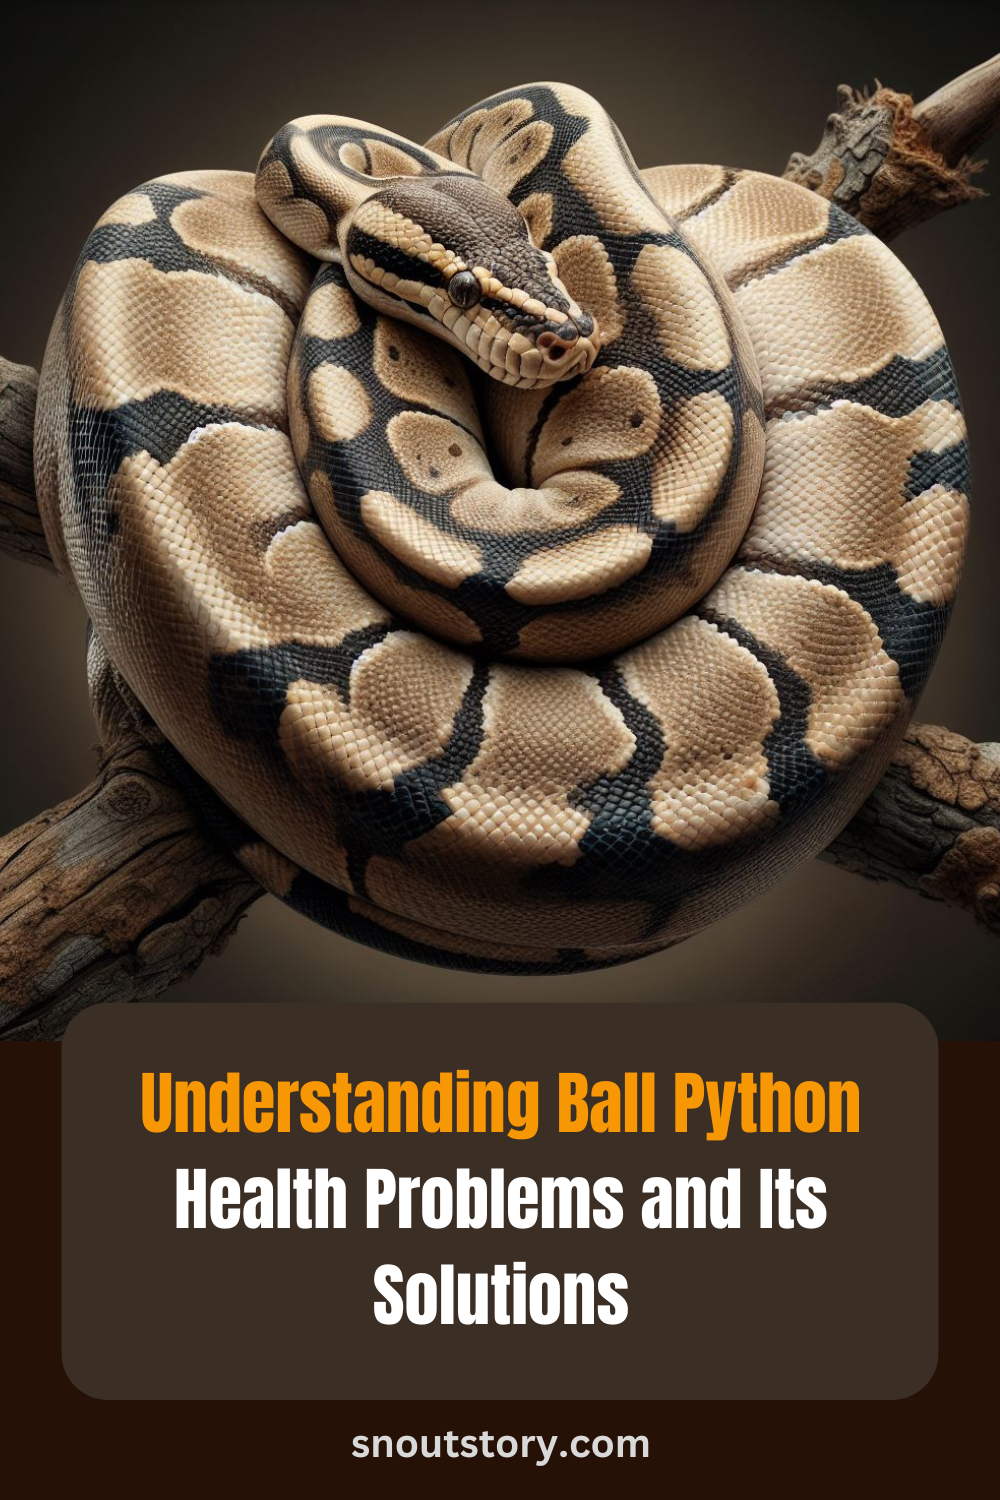 Understanding Ball Python Health Problems And It’s Solutions